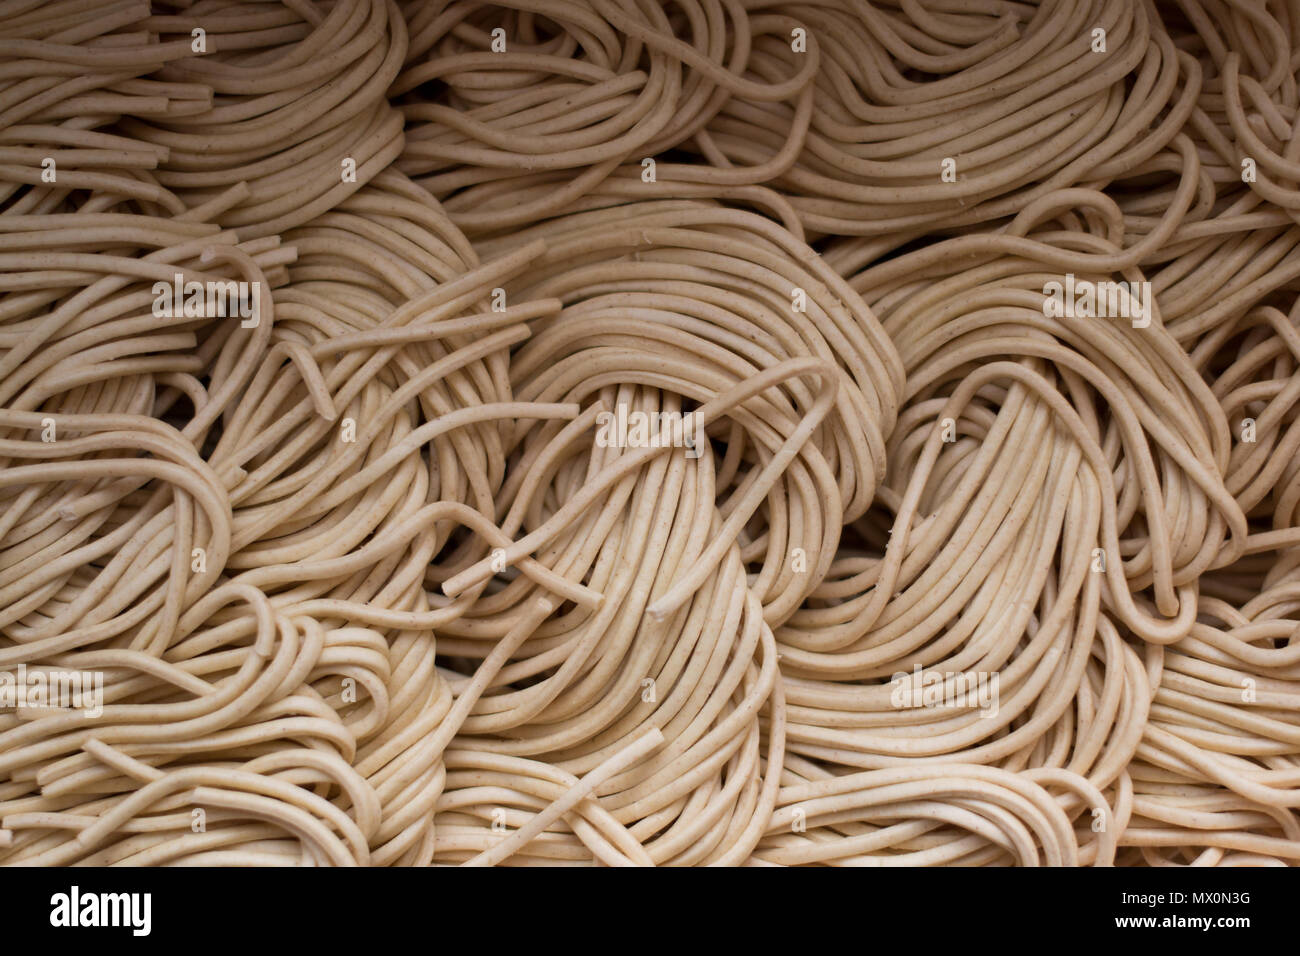 Close up view of raw noodles Stock Photo